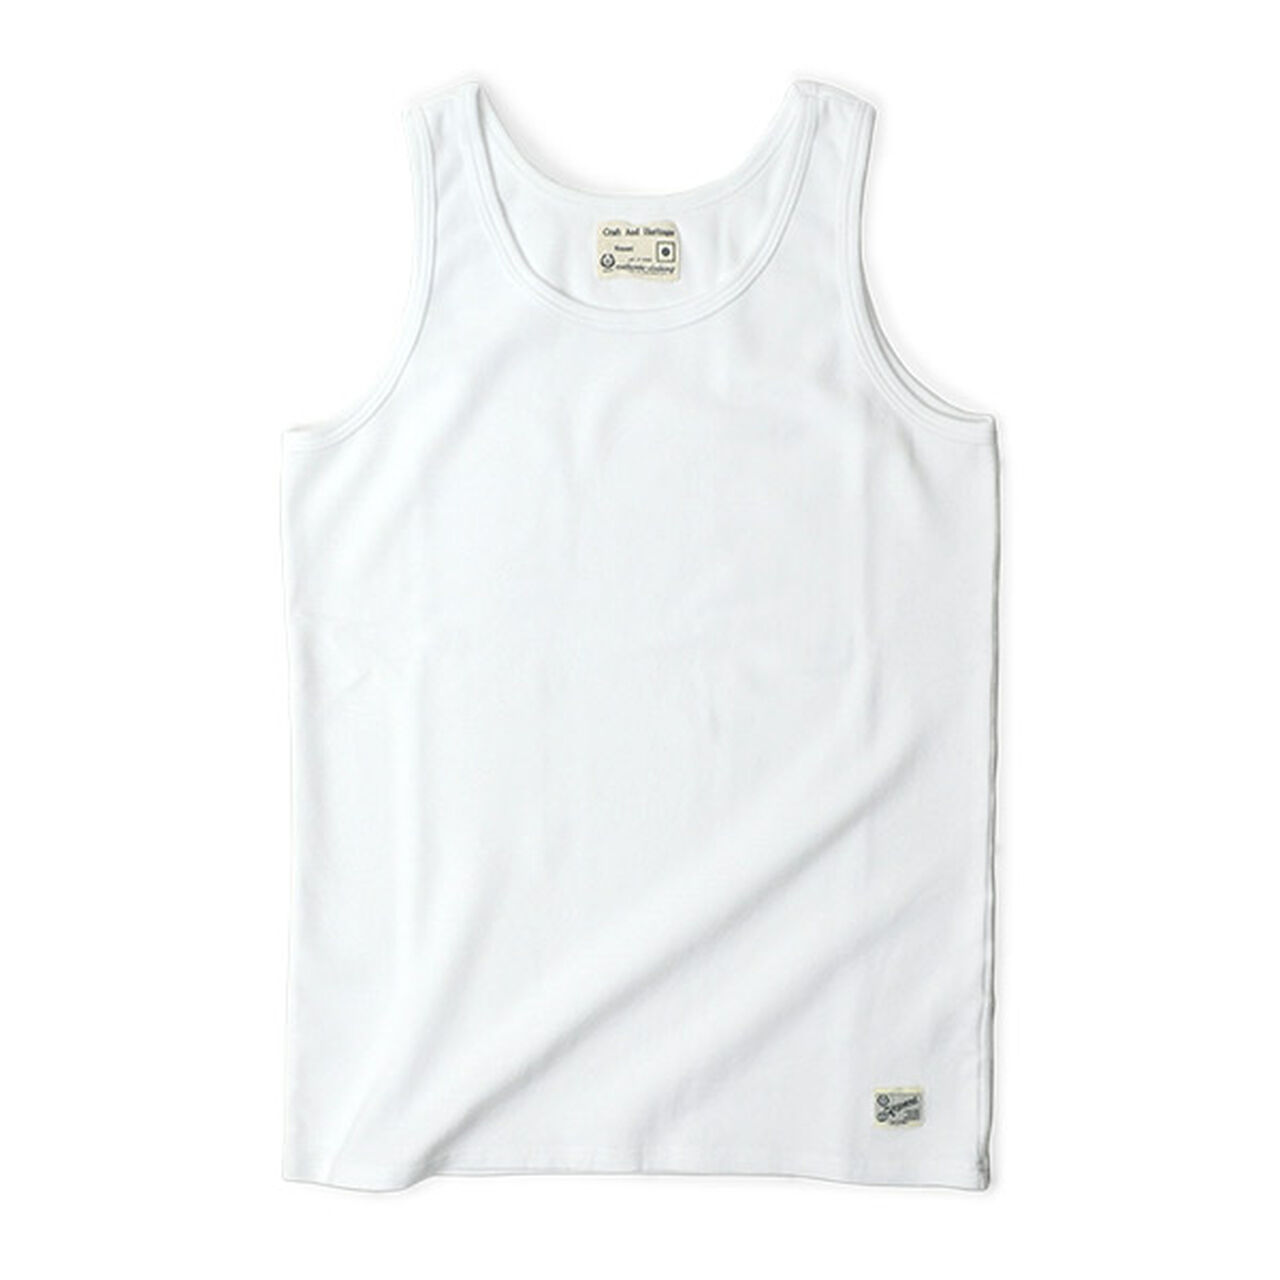 Raffy stretch milling tank top,White, large image number 0